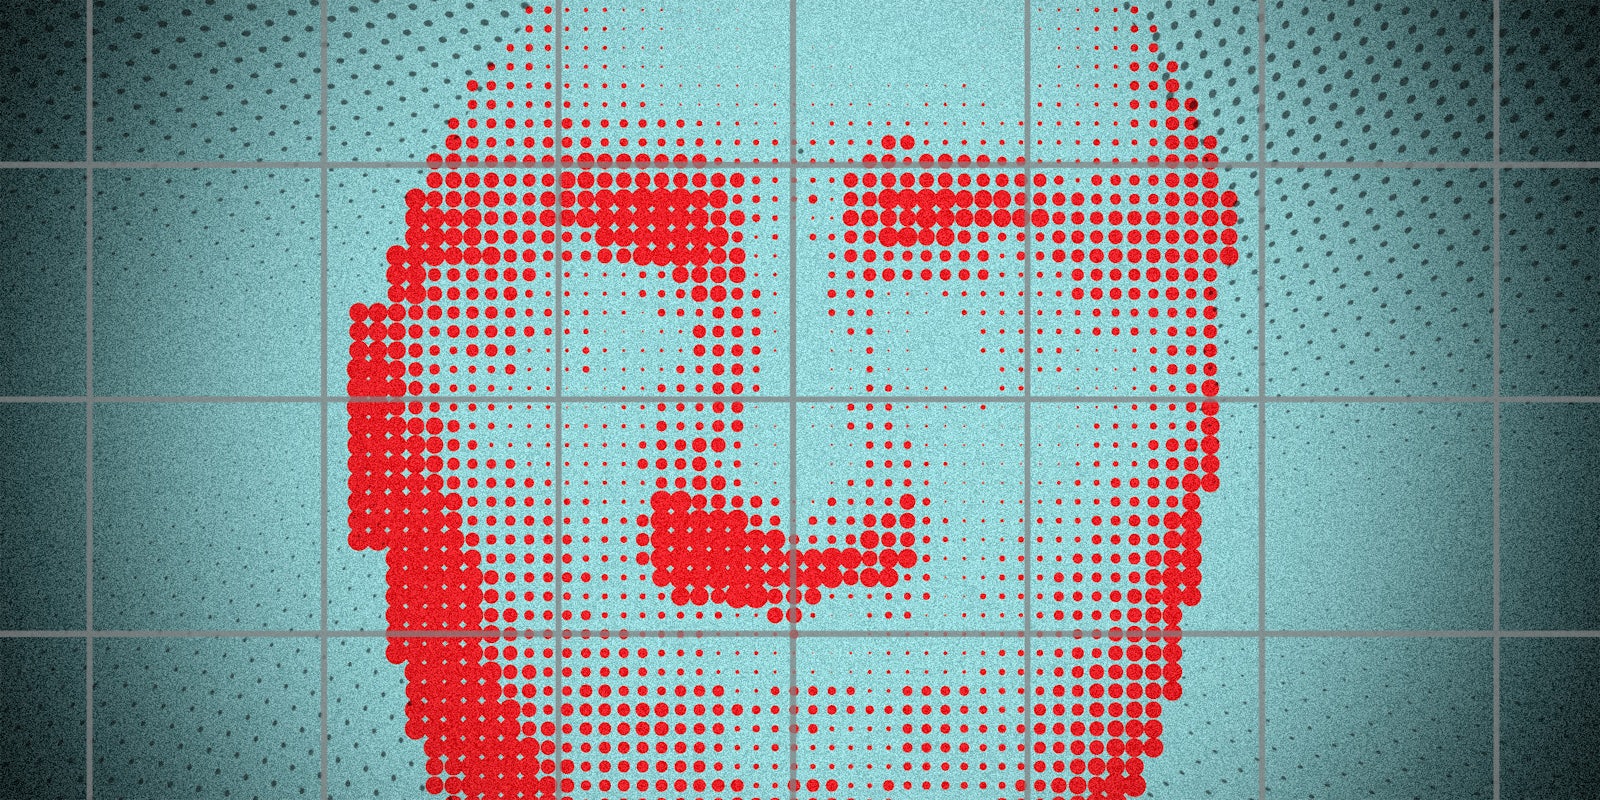 An illustration of a pixelated face, possibly being scanned through facial recognition..